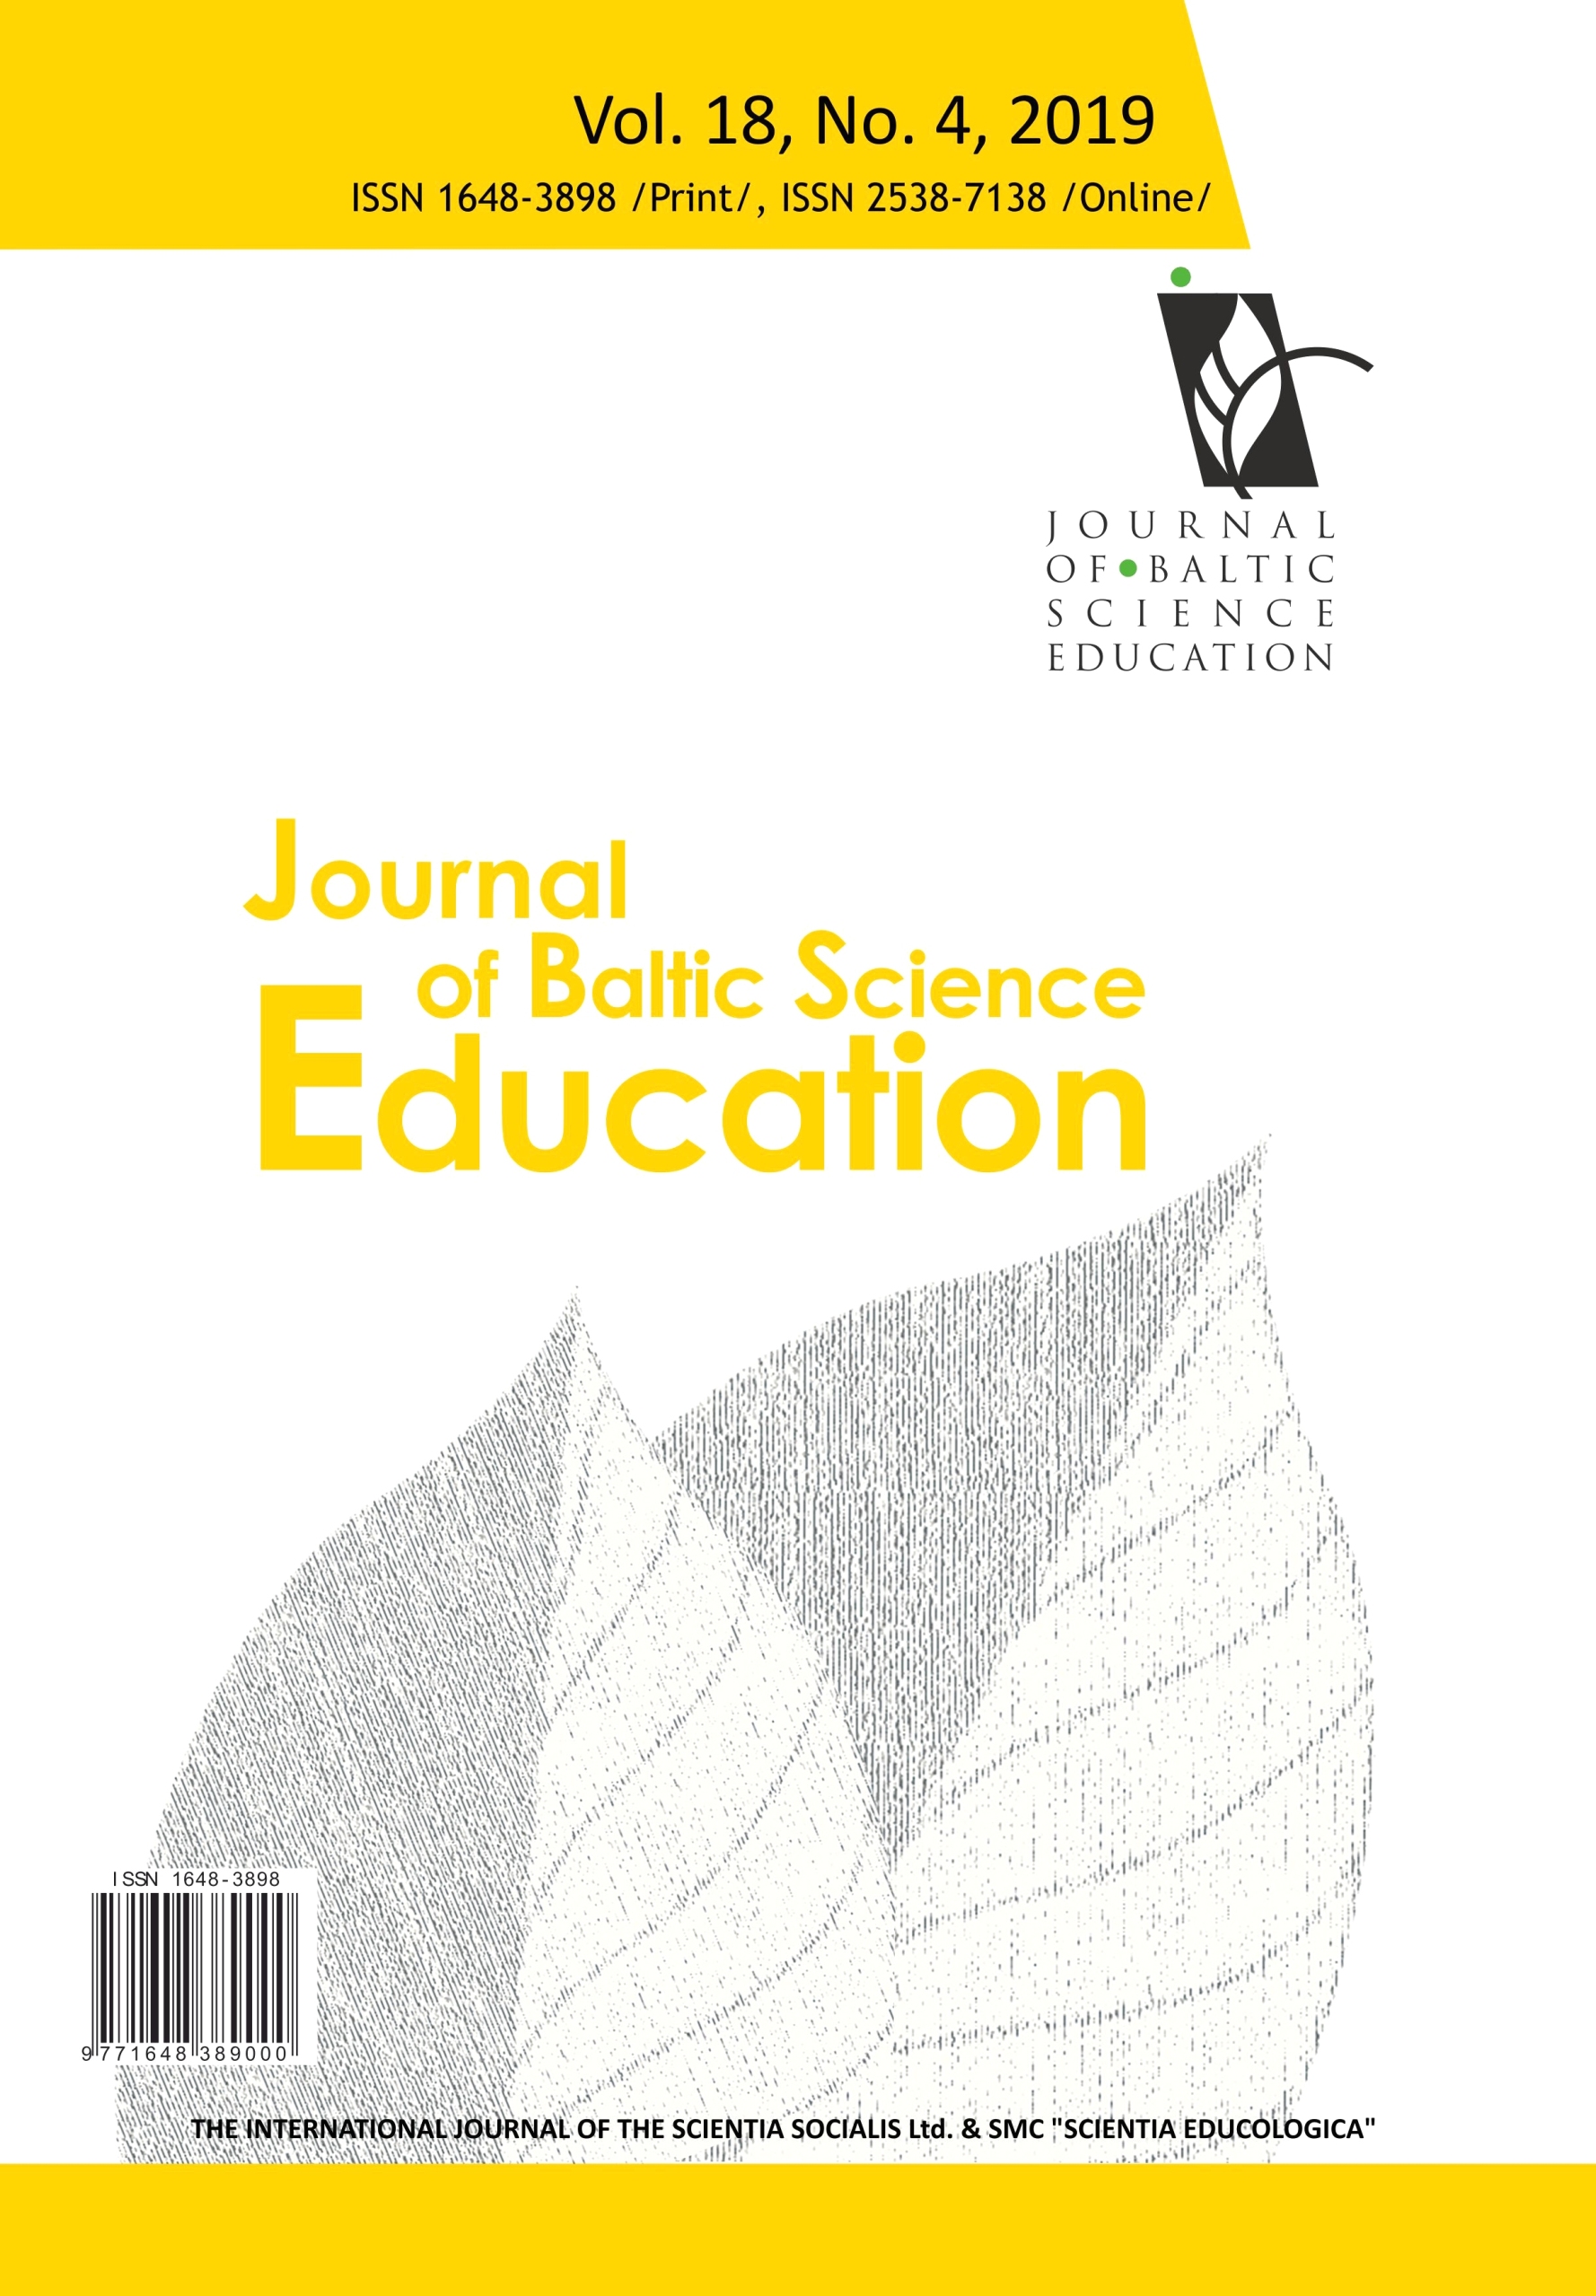 ADOPTING IDEAS FROM CURRENT NORDIC TEACHER EDUCATION STRATEGIES TO INITIAL SCIENCE TEACHER EDUCATION